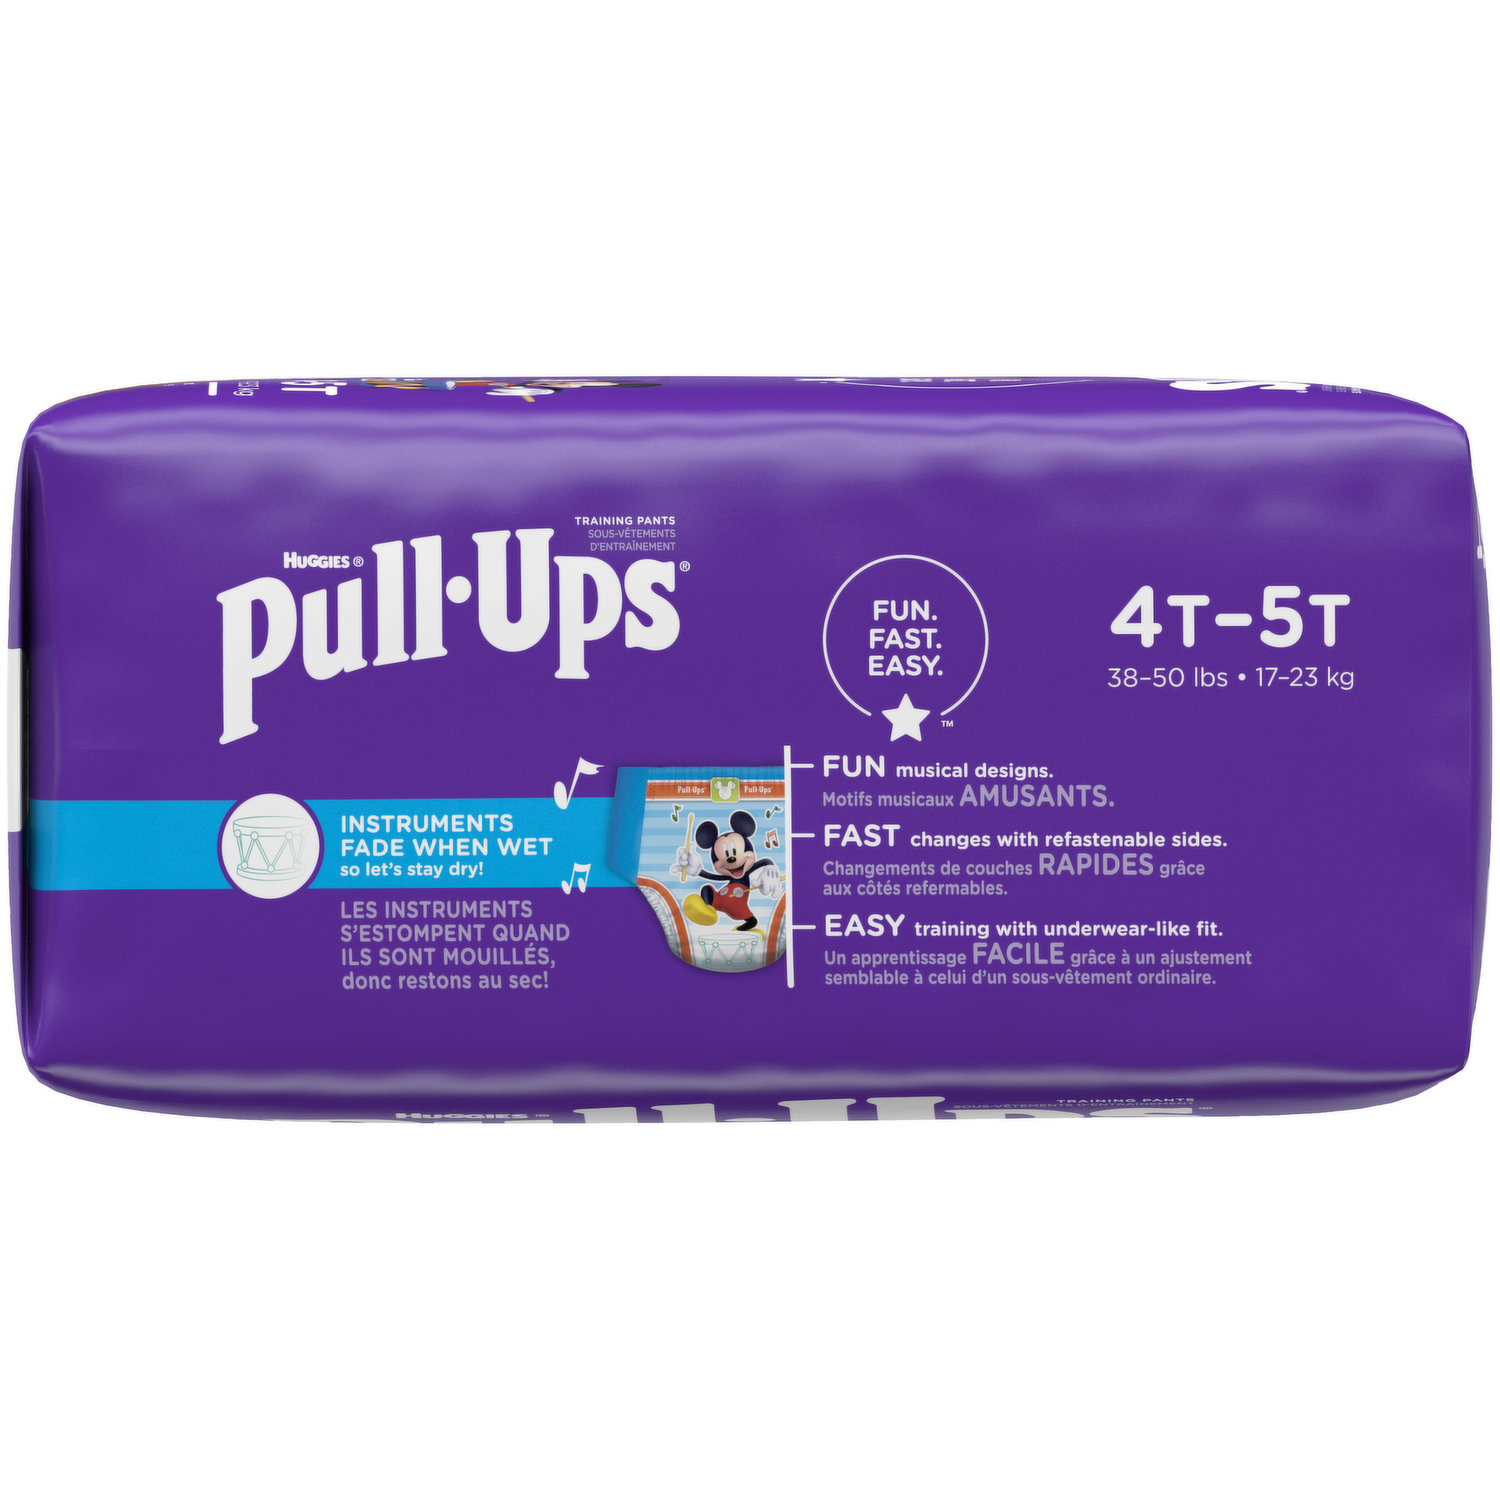 Pull-Ups® - With refastenable sides, graphics that fade when wet